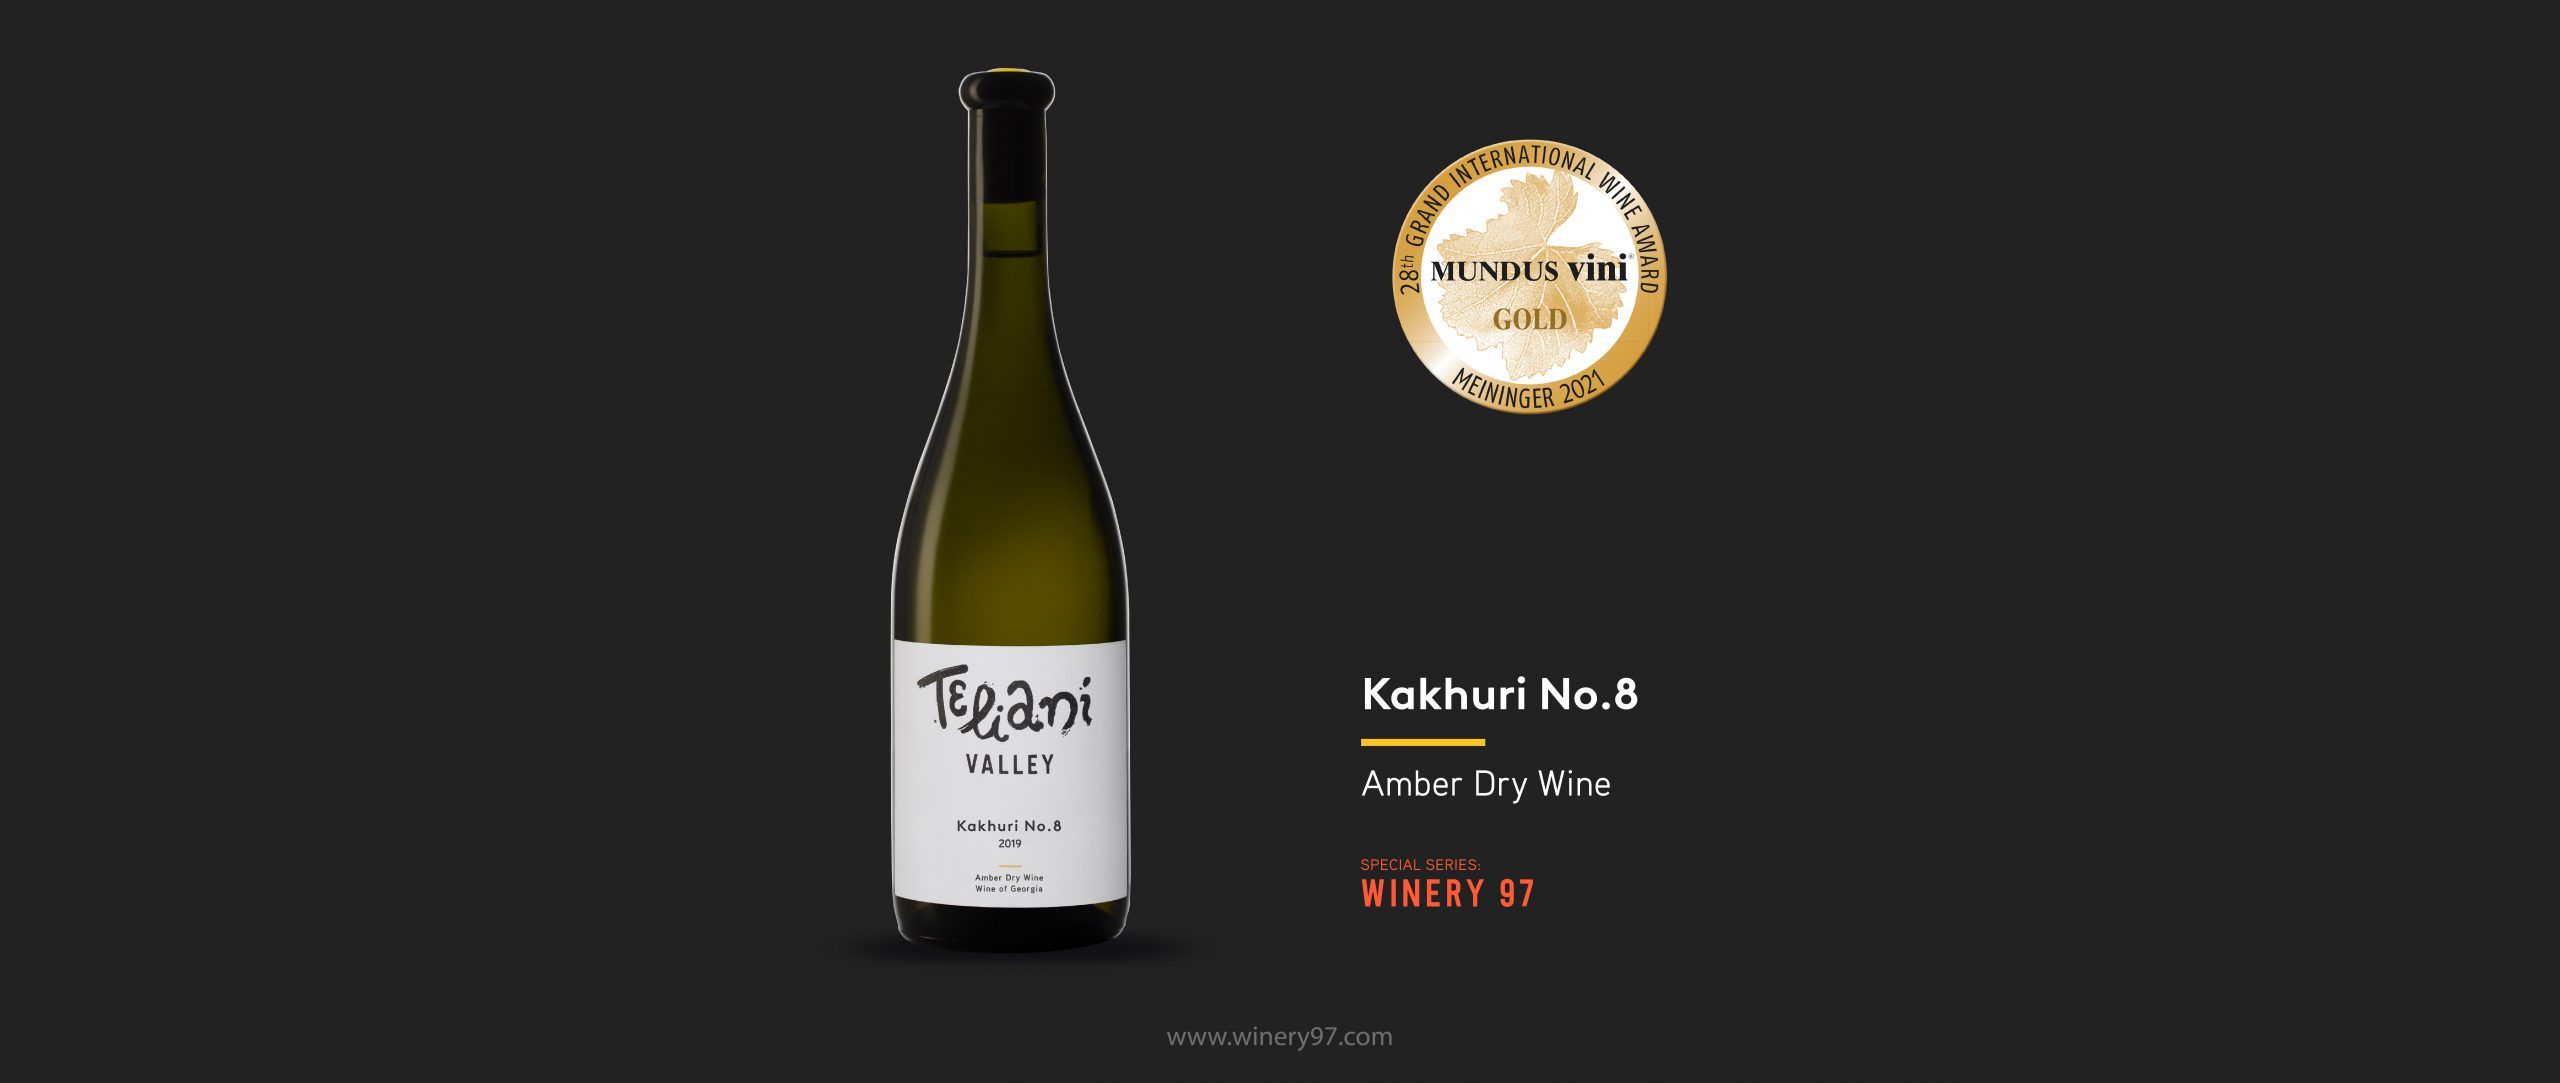 Kakhuri #8 by Teliani Valley has been awarded with a Gold medal